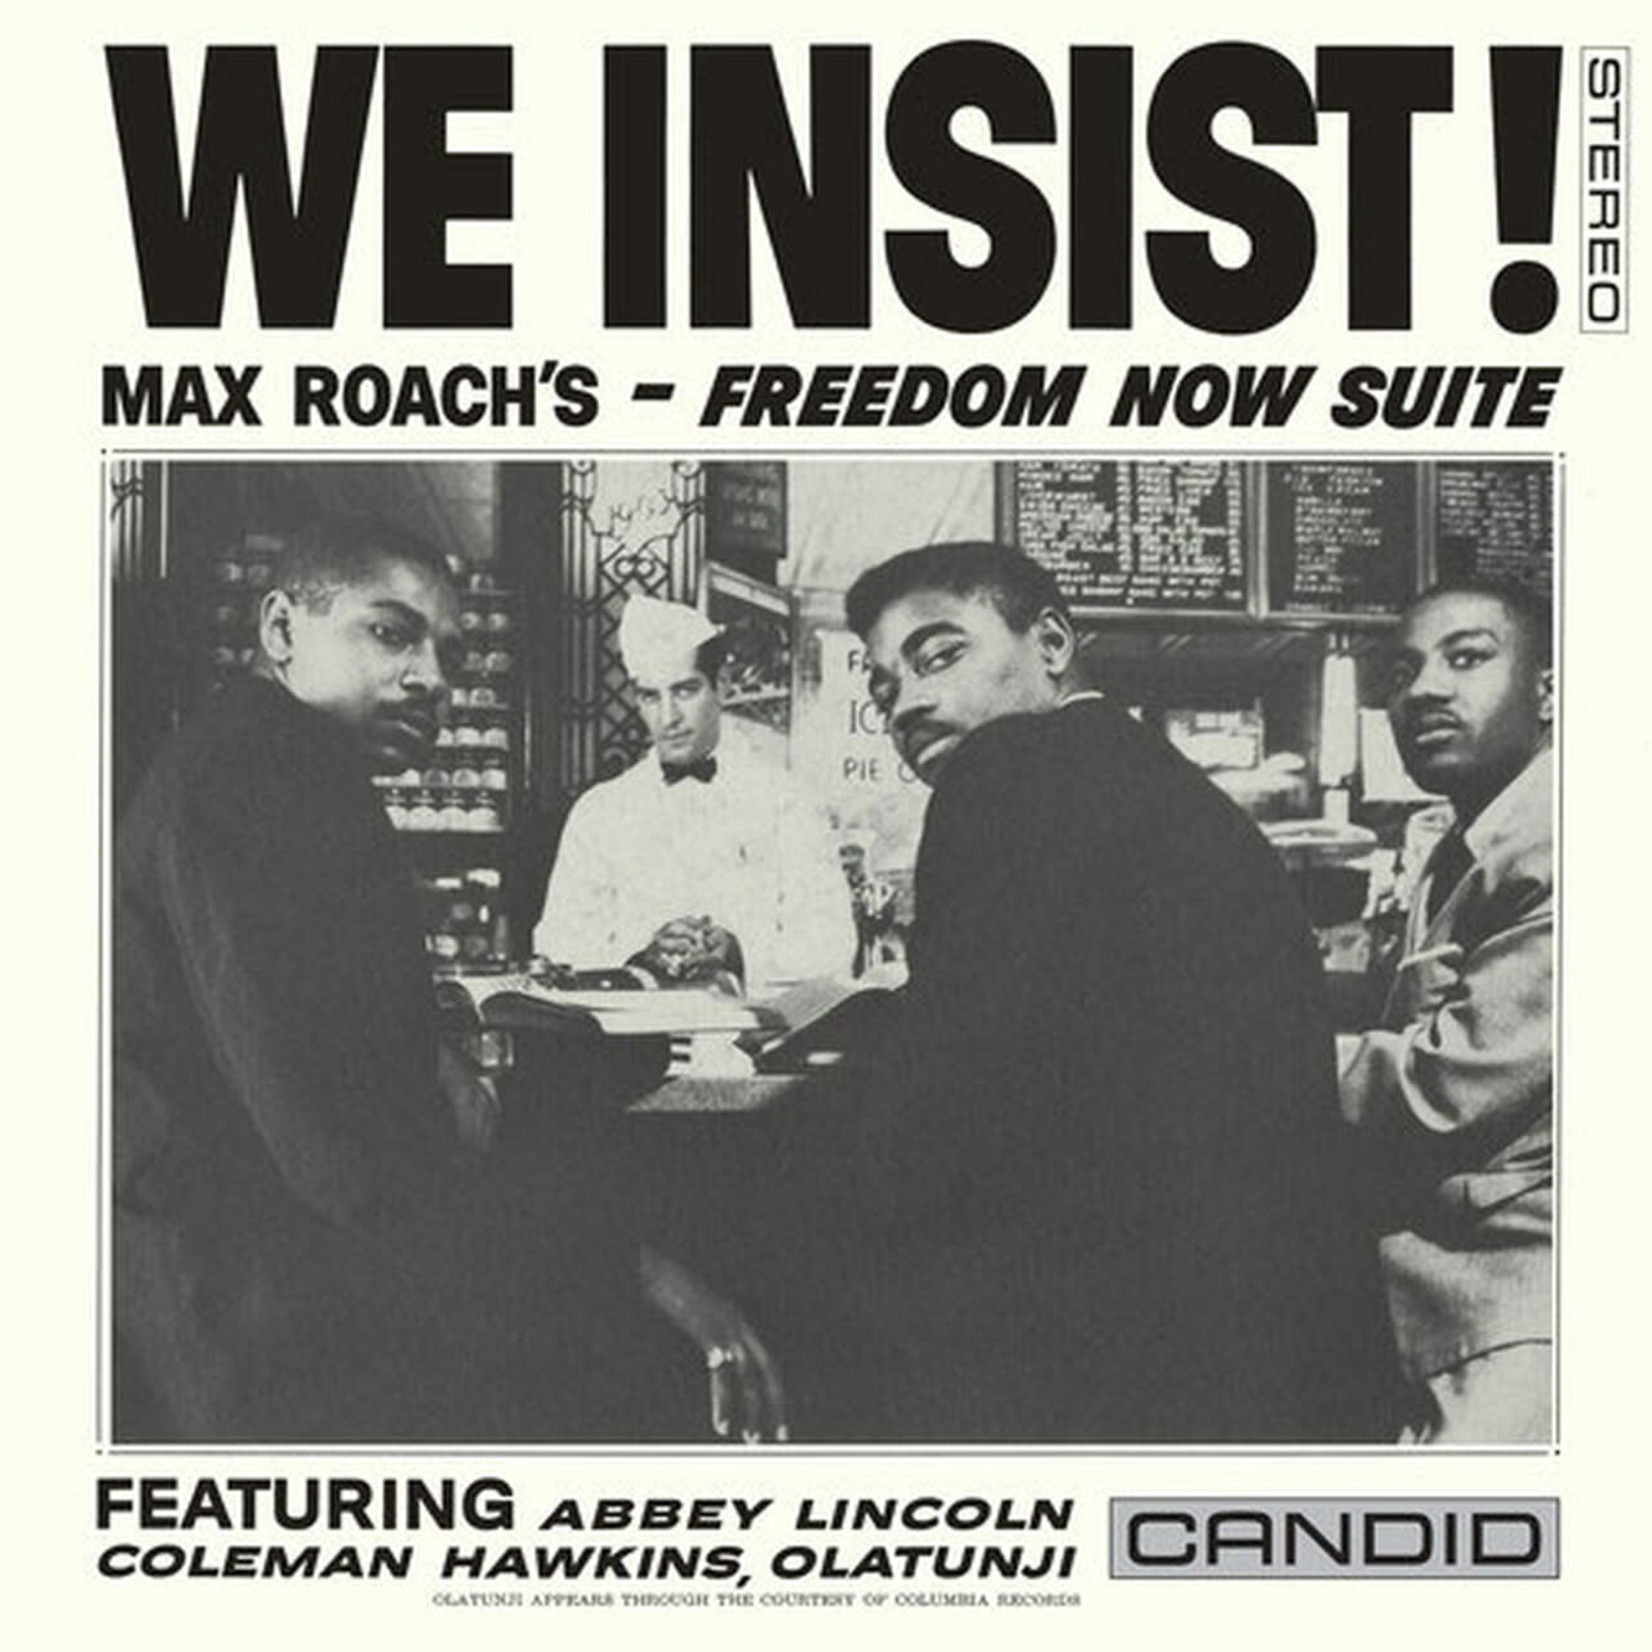 [New] Max Roach - We Insist! Max Roach's Freedom Now Suite (remastered)